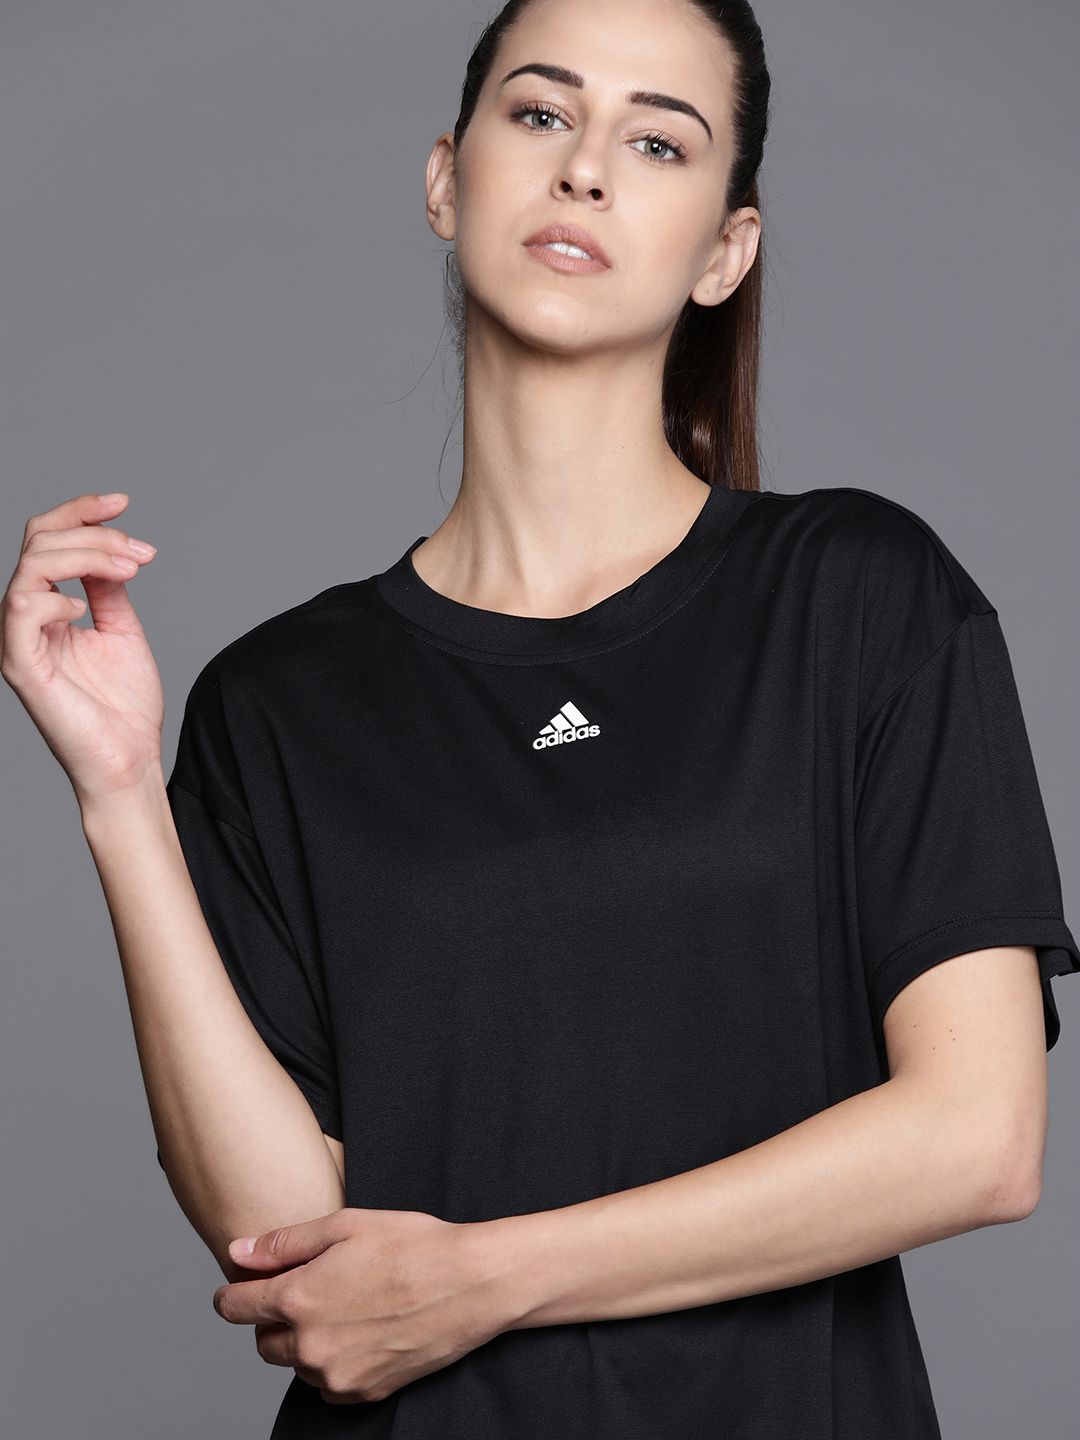 ADIDAS Women Black Training 3-Stripes Solid T-shirt Price in India